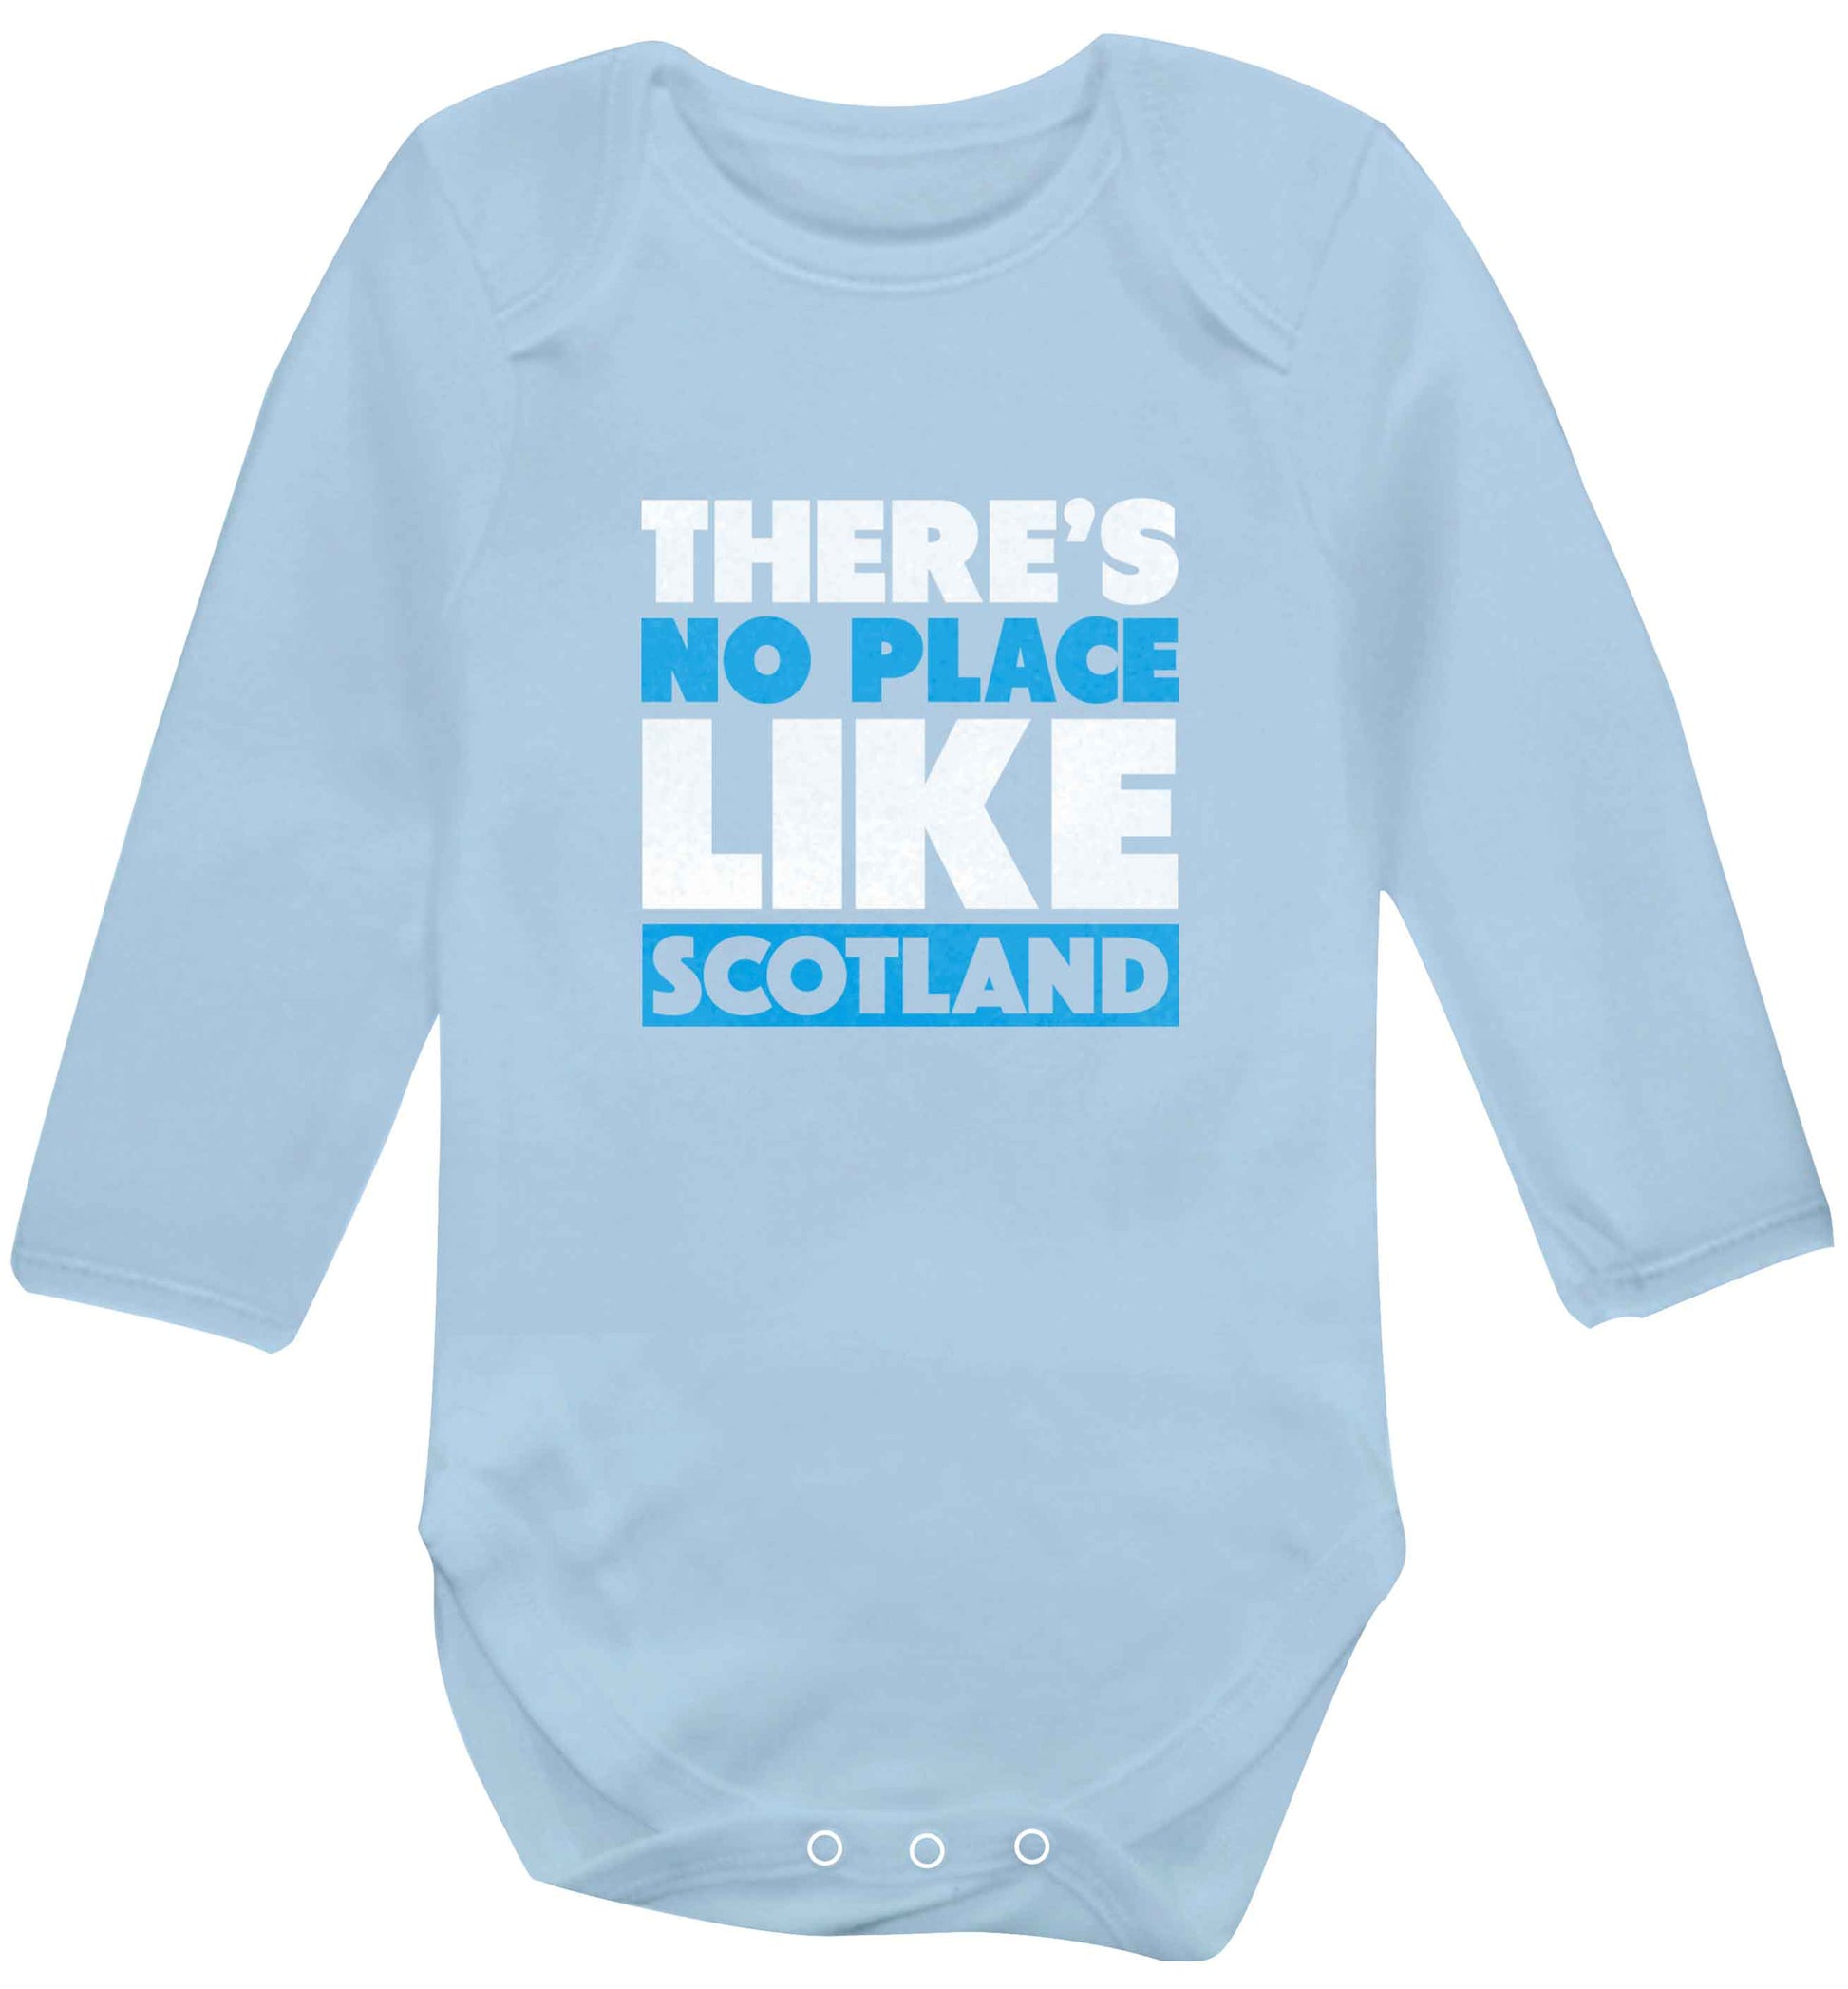 There's no place like Scotland baby vest long sleeved pale blue 6-12 months